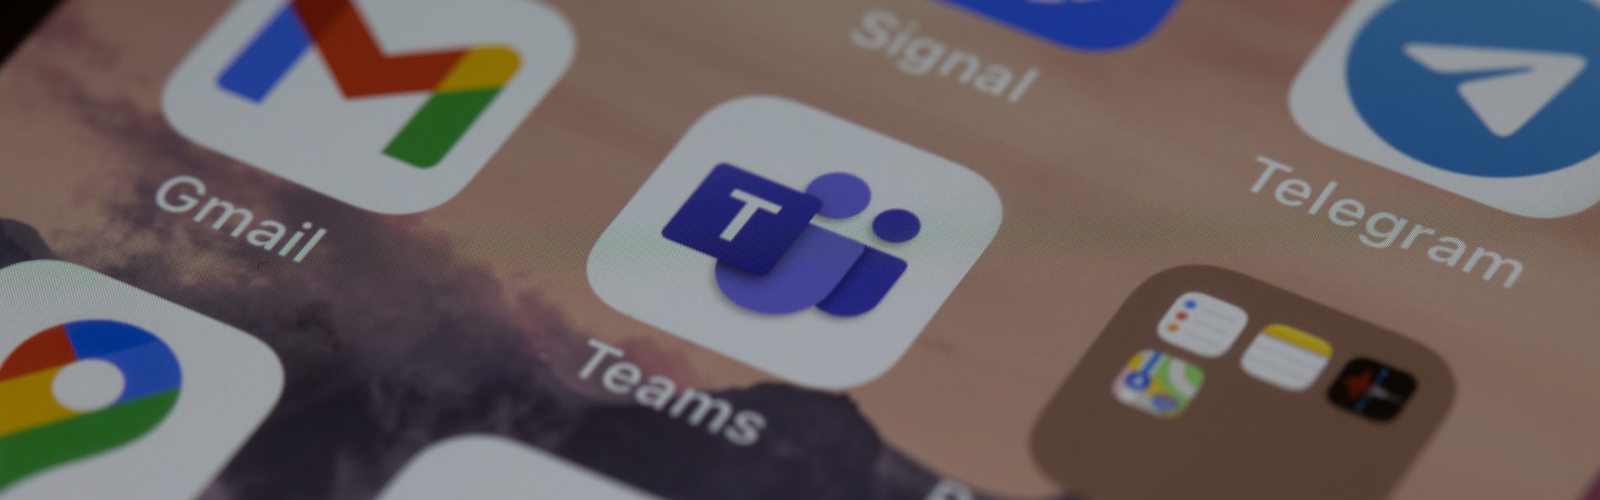 Close-up of the Microsoft Teams application icon on an iPhone.